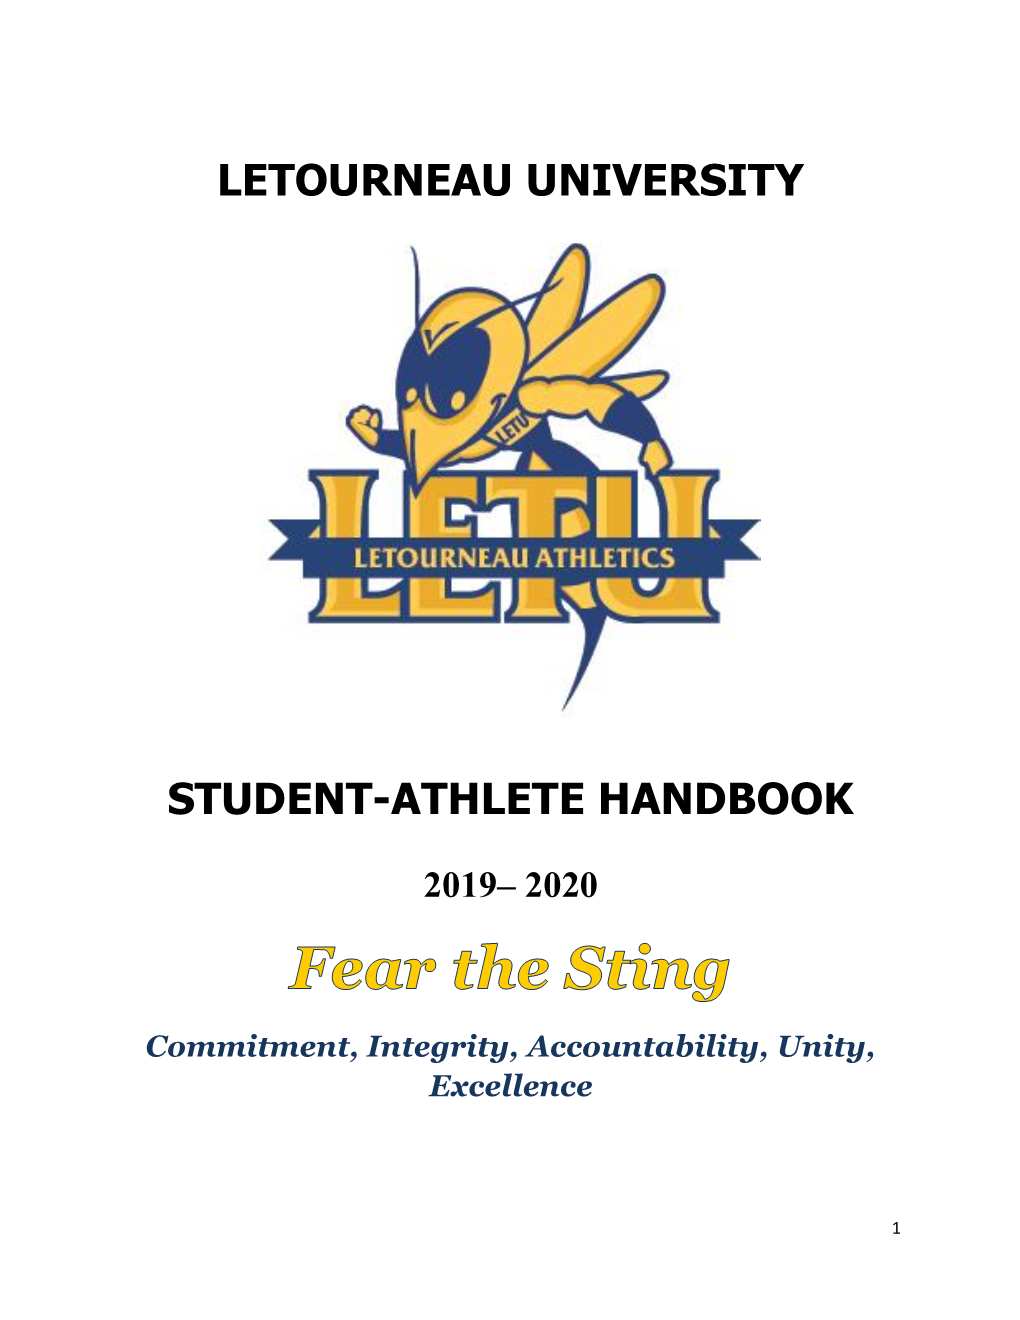 Letourneau University Student-Athlete Handbook and Have Been Given the Opportunity to Ask Questions About All Information and Policies in the Handbook